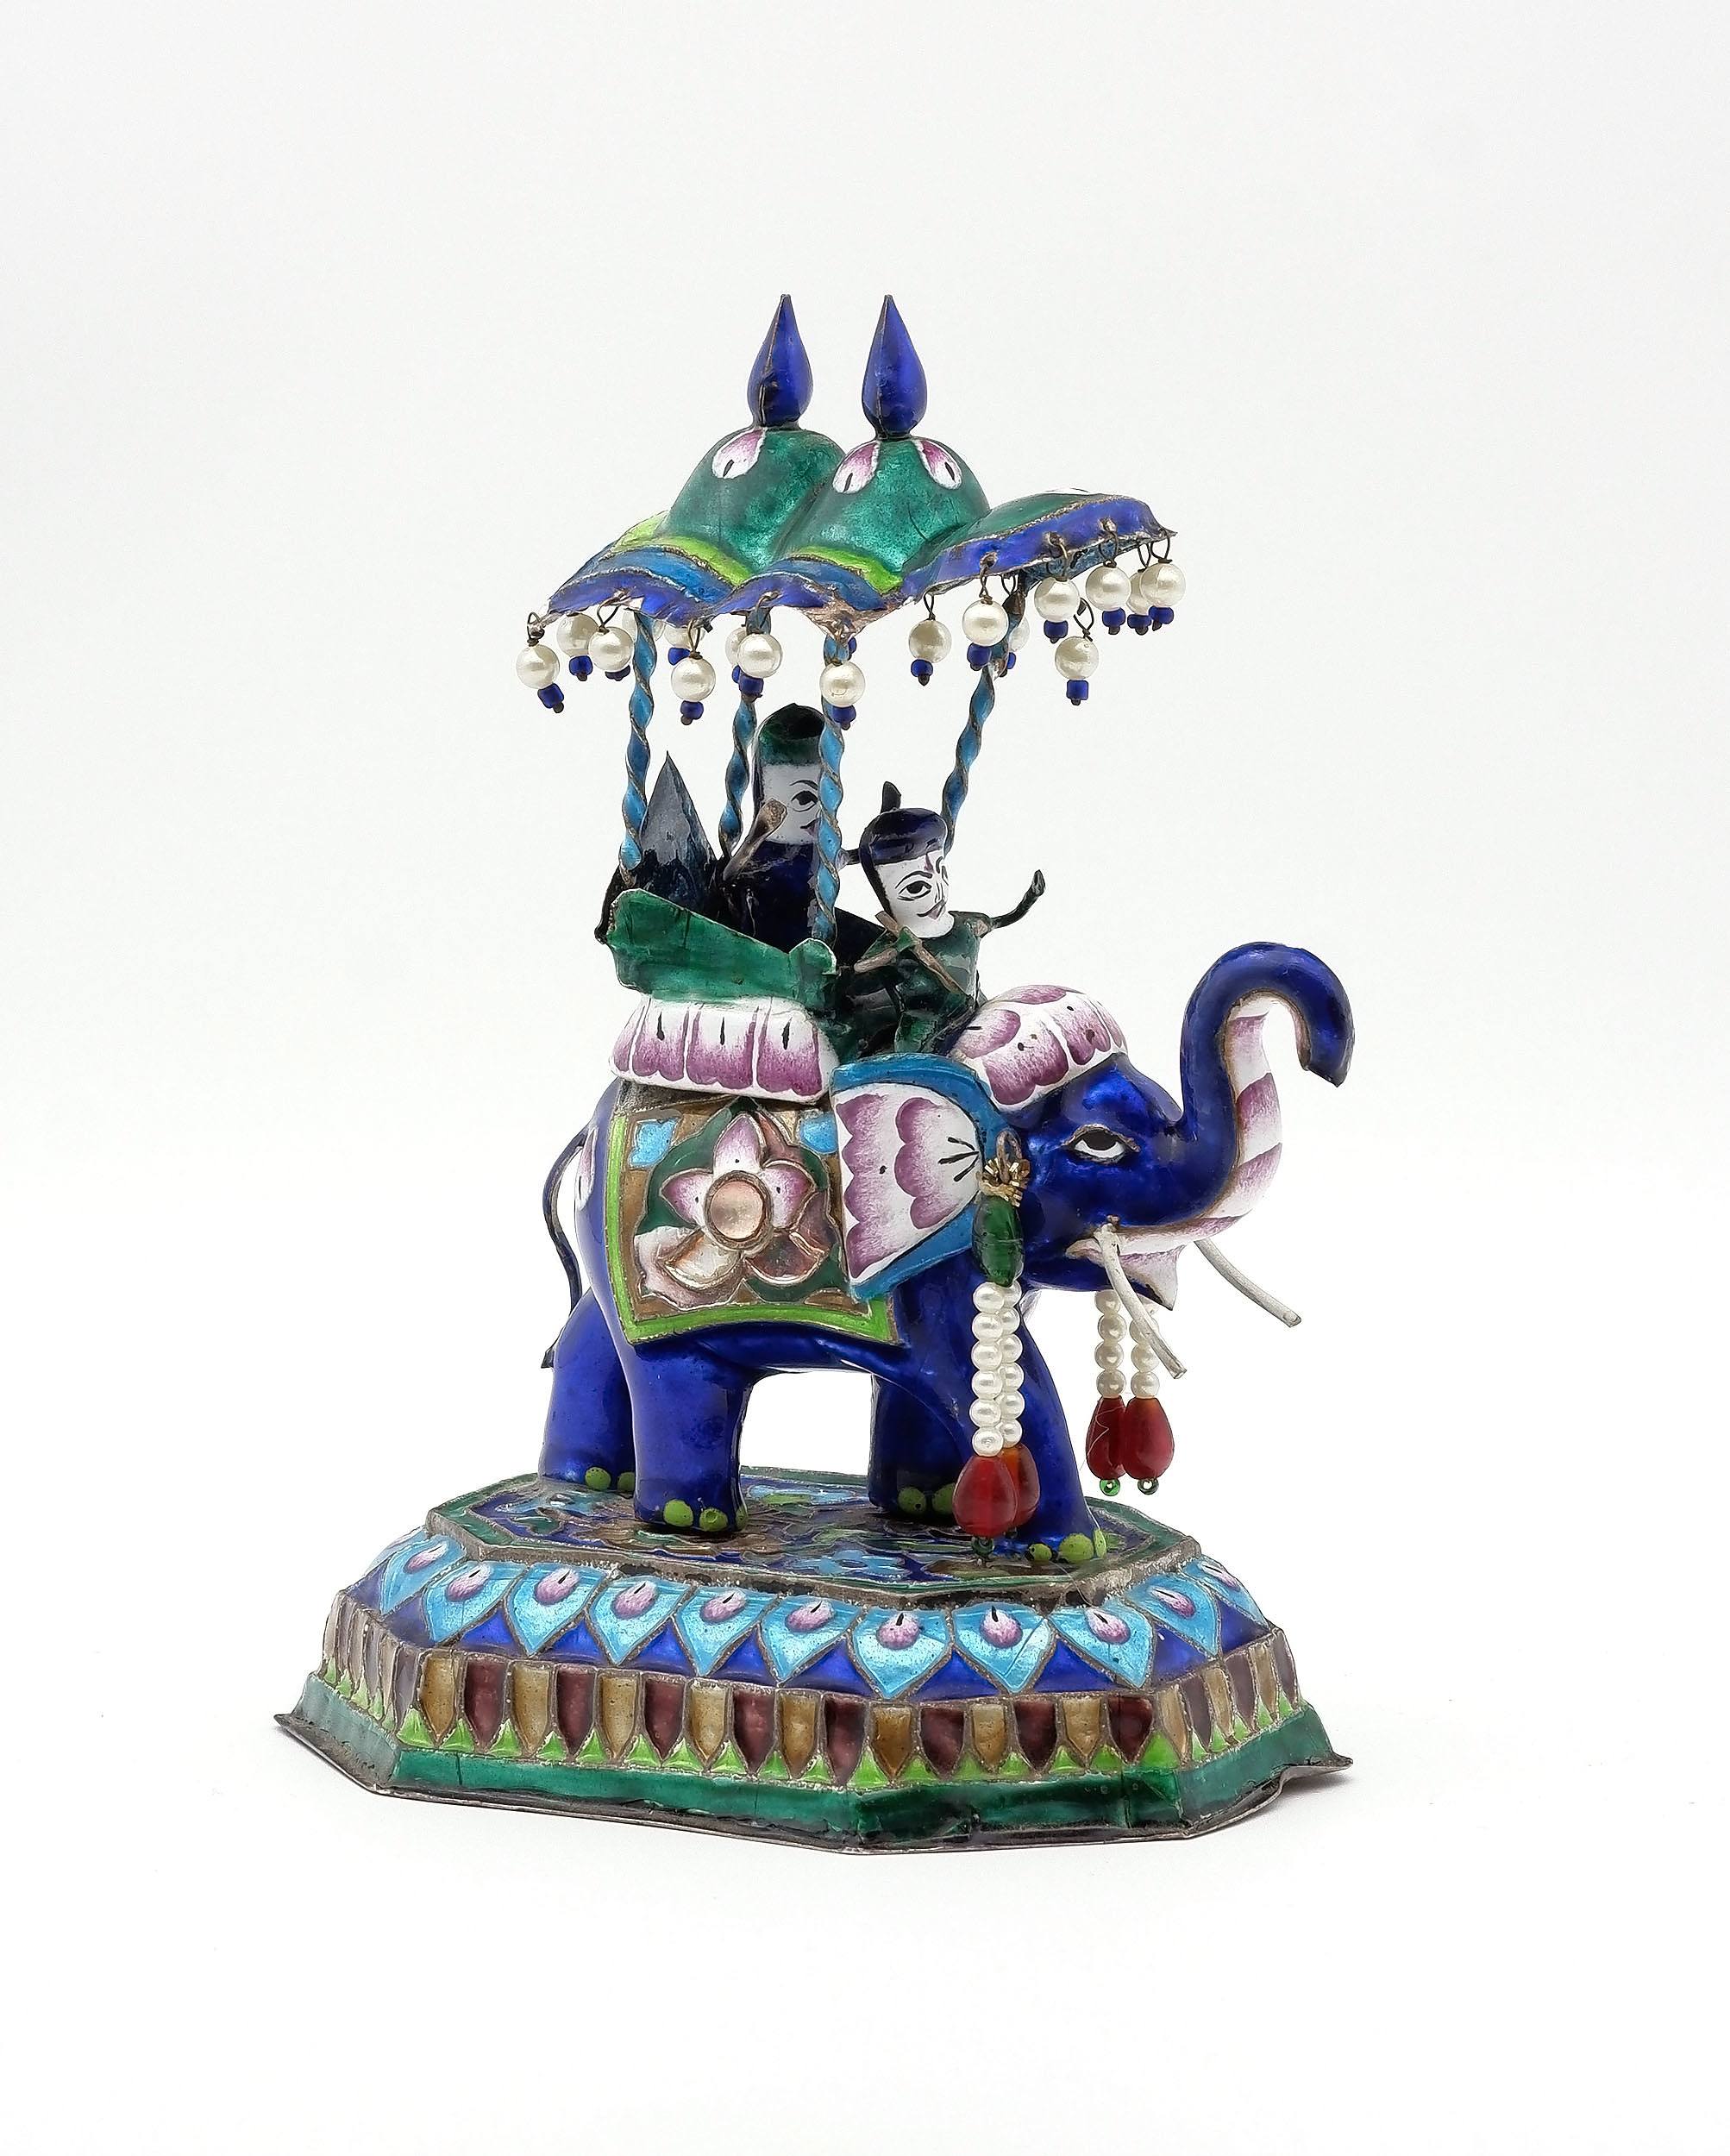 'Vintage Indian Silver and Enamel Decorated Elephant Group'